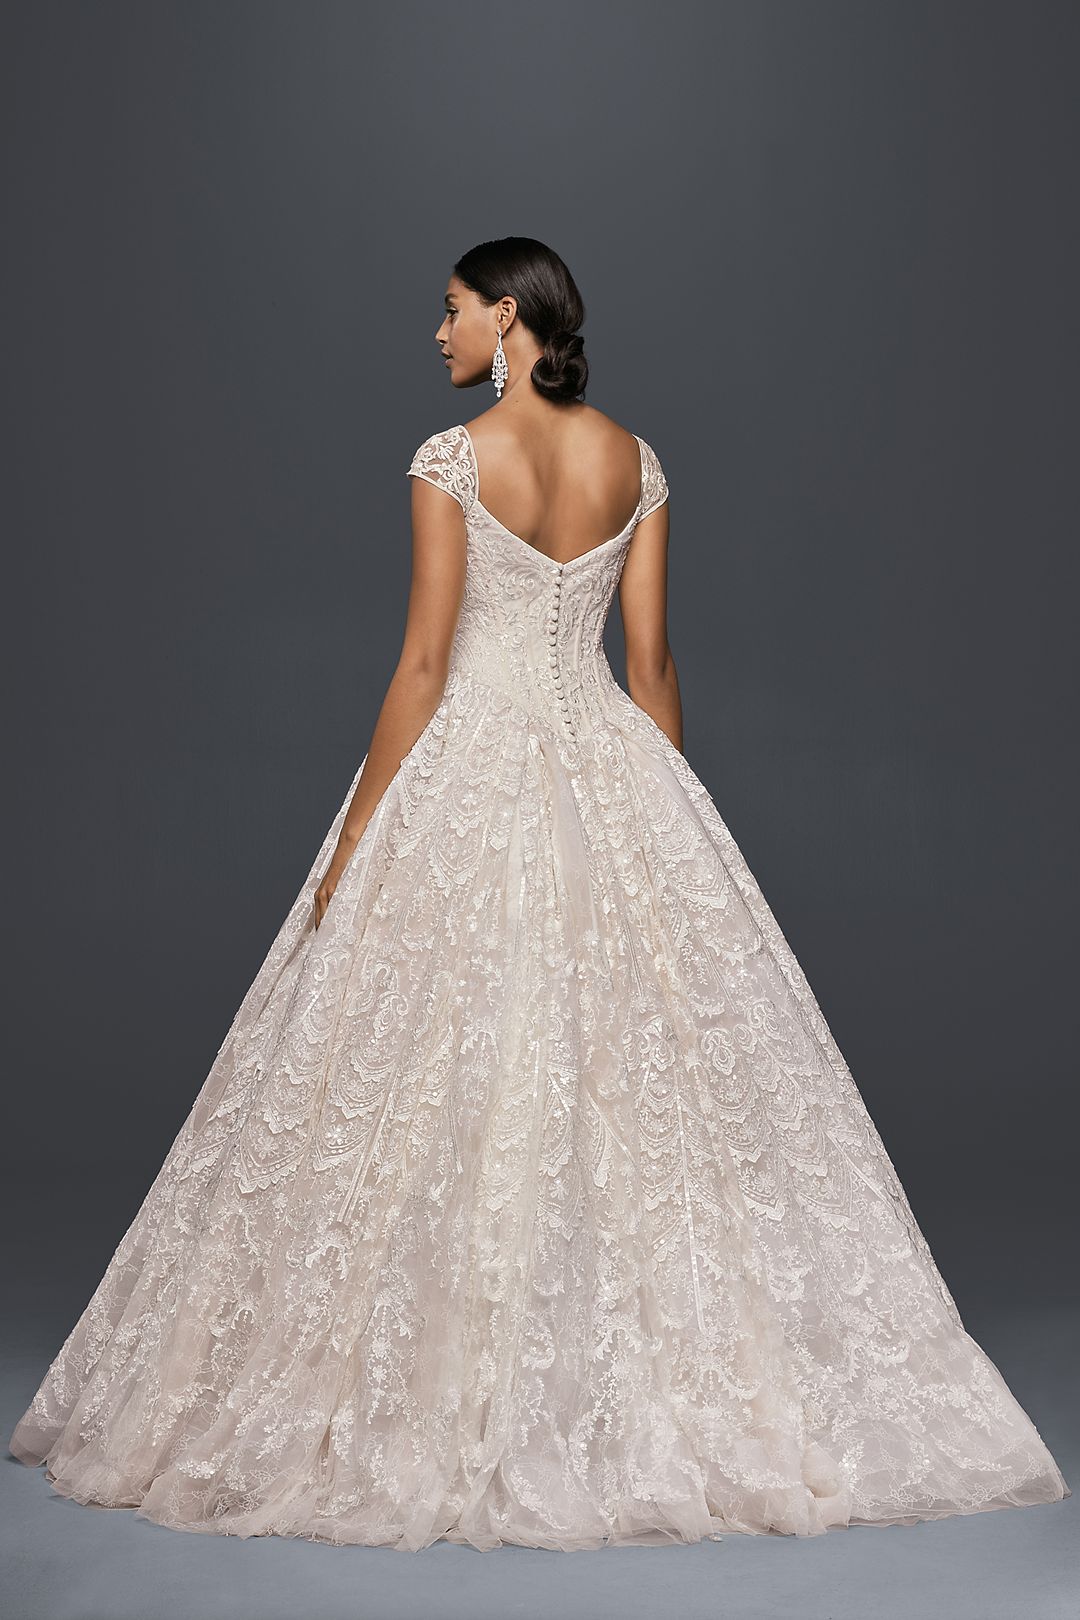 Grand Lace Ball Gown with Beaded Cap Sleeves Image 2